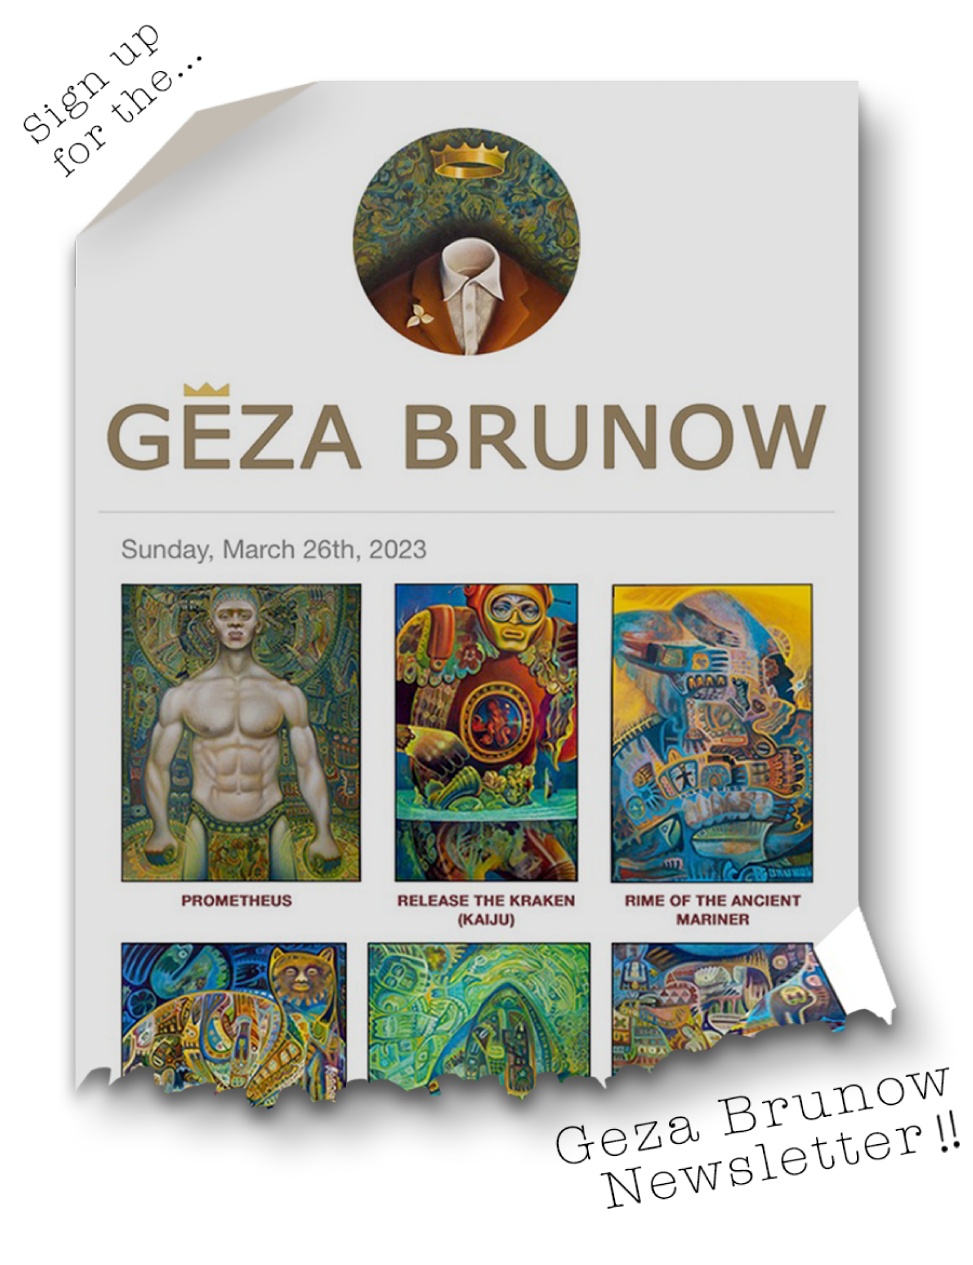 Sign Up for the Geza Brunow Newsletter!